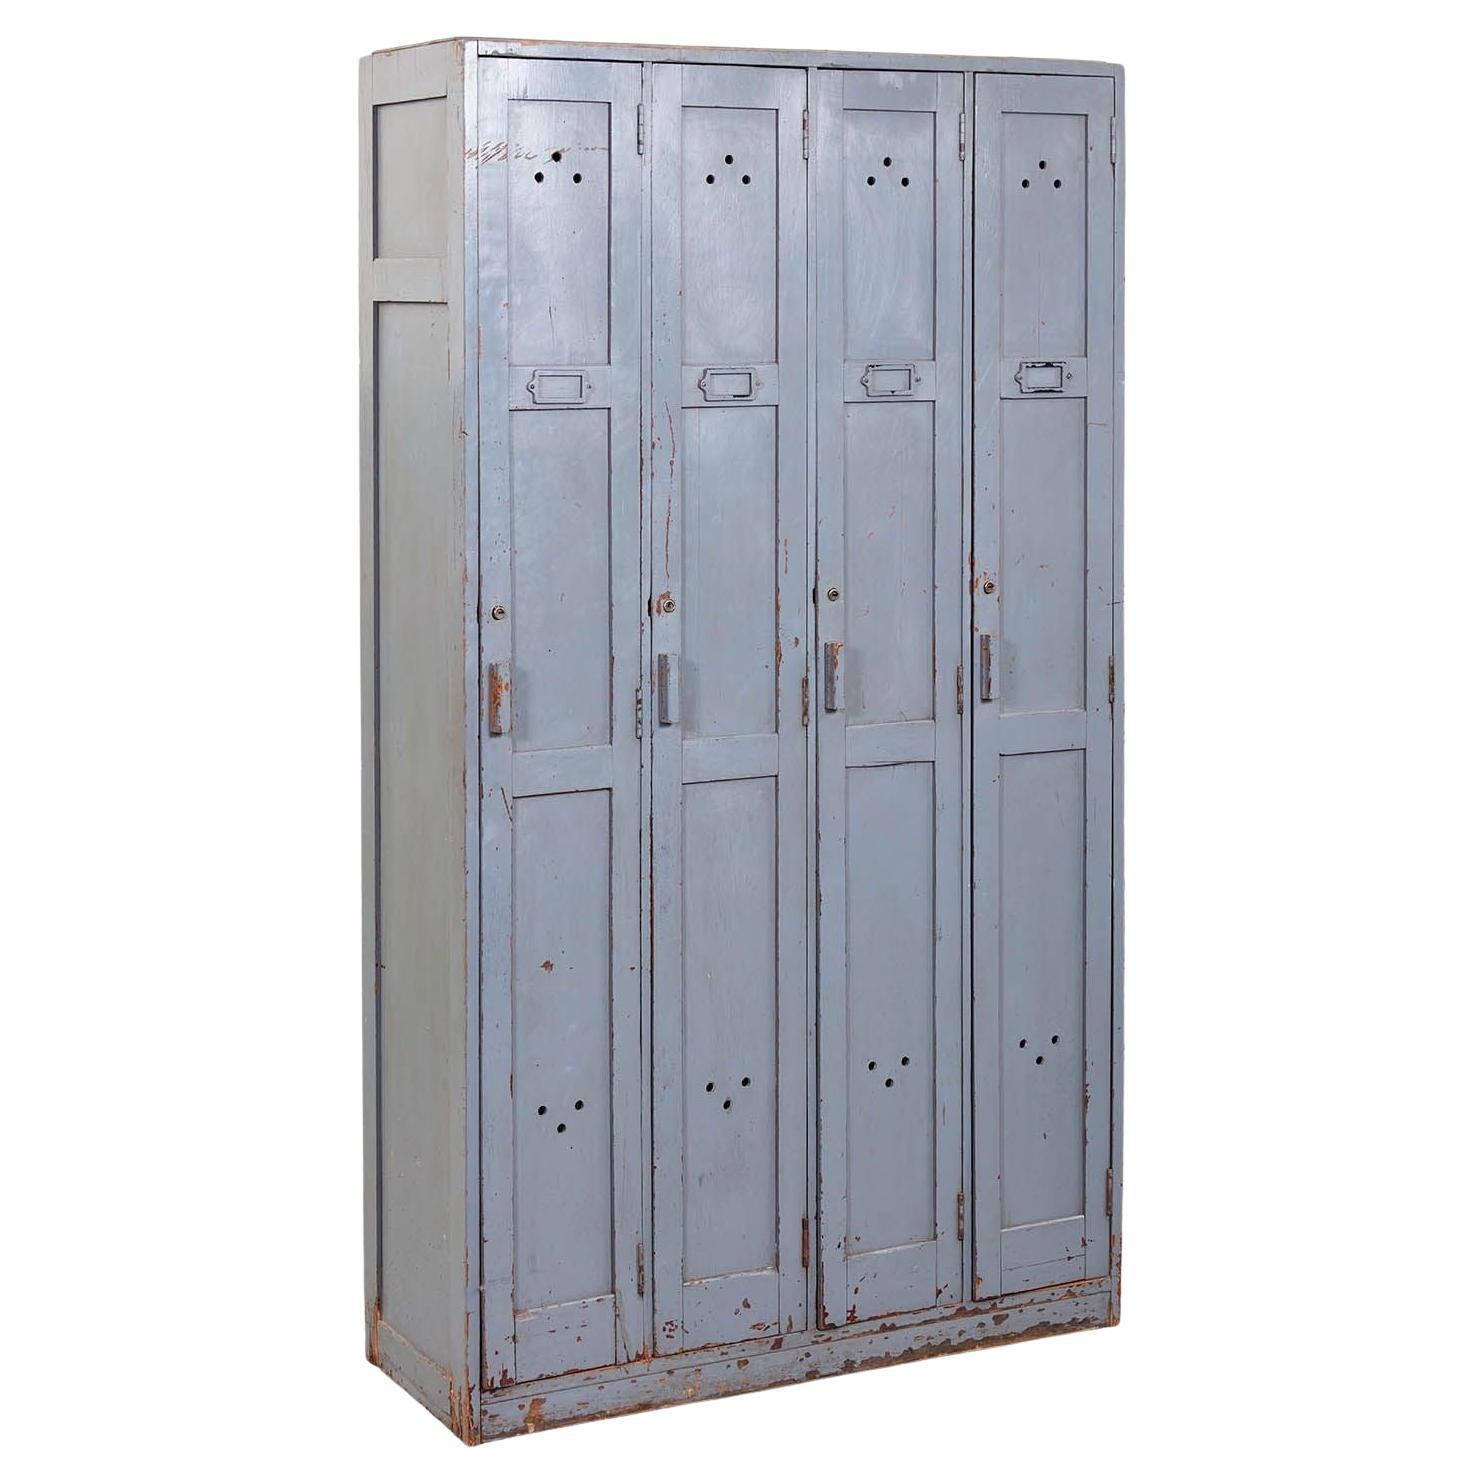 Post Office Lockers For Sale